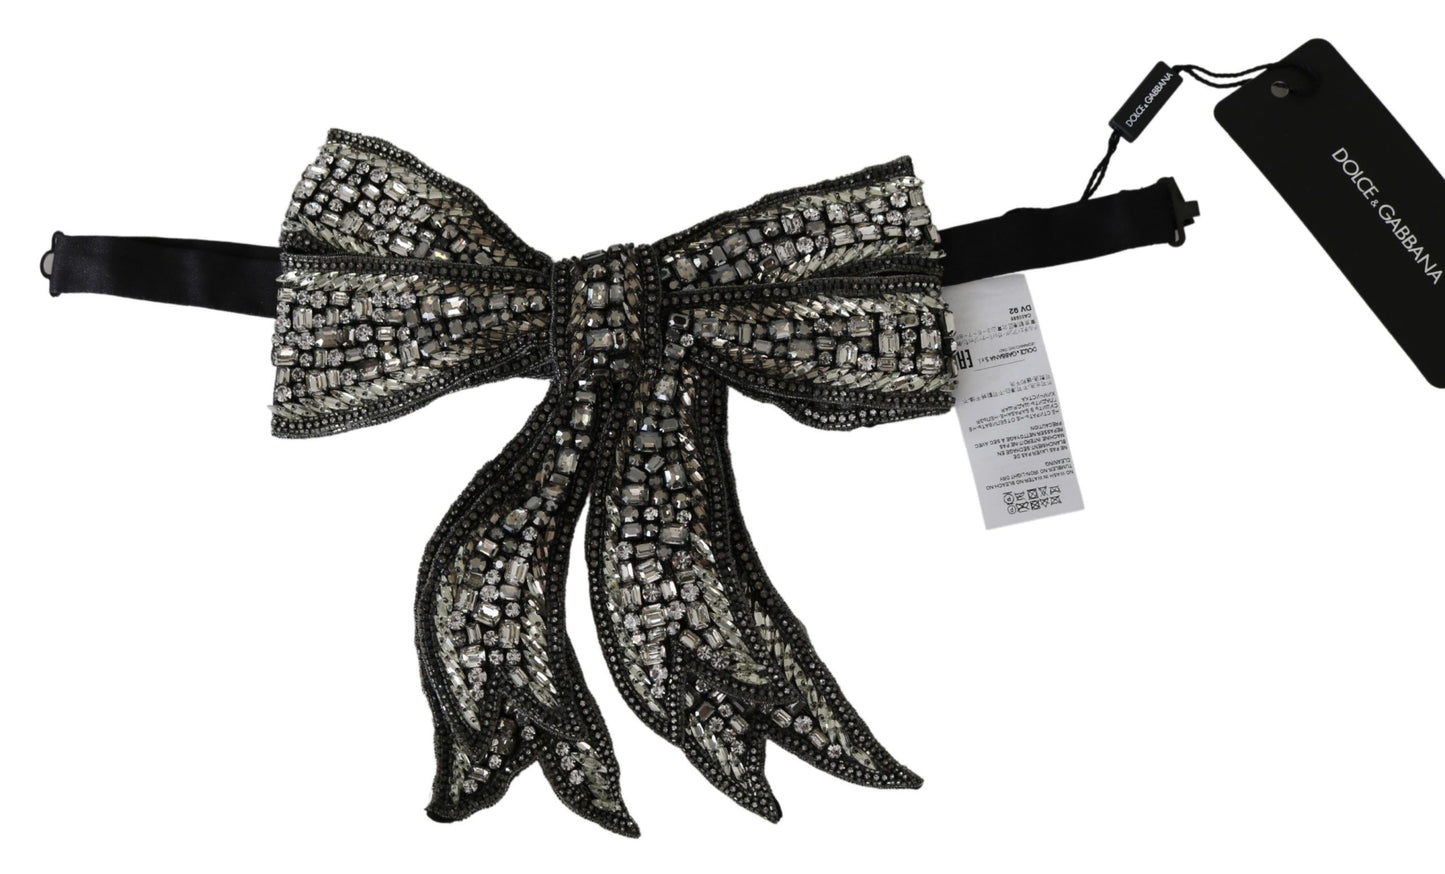 Dolce & Gabbana Silver Crystal Beaded Sequined 100% Silk Catwalk Necklace Bowtie